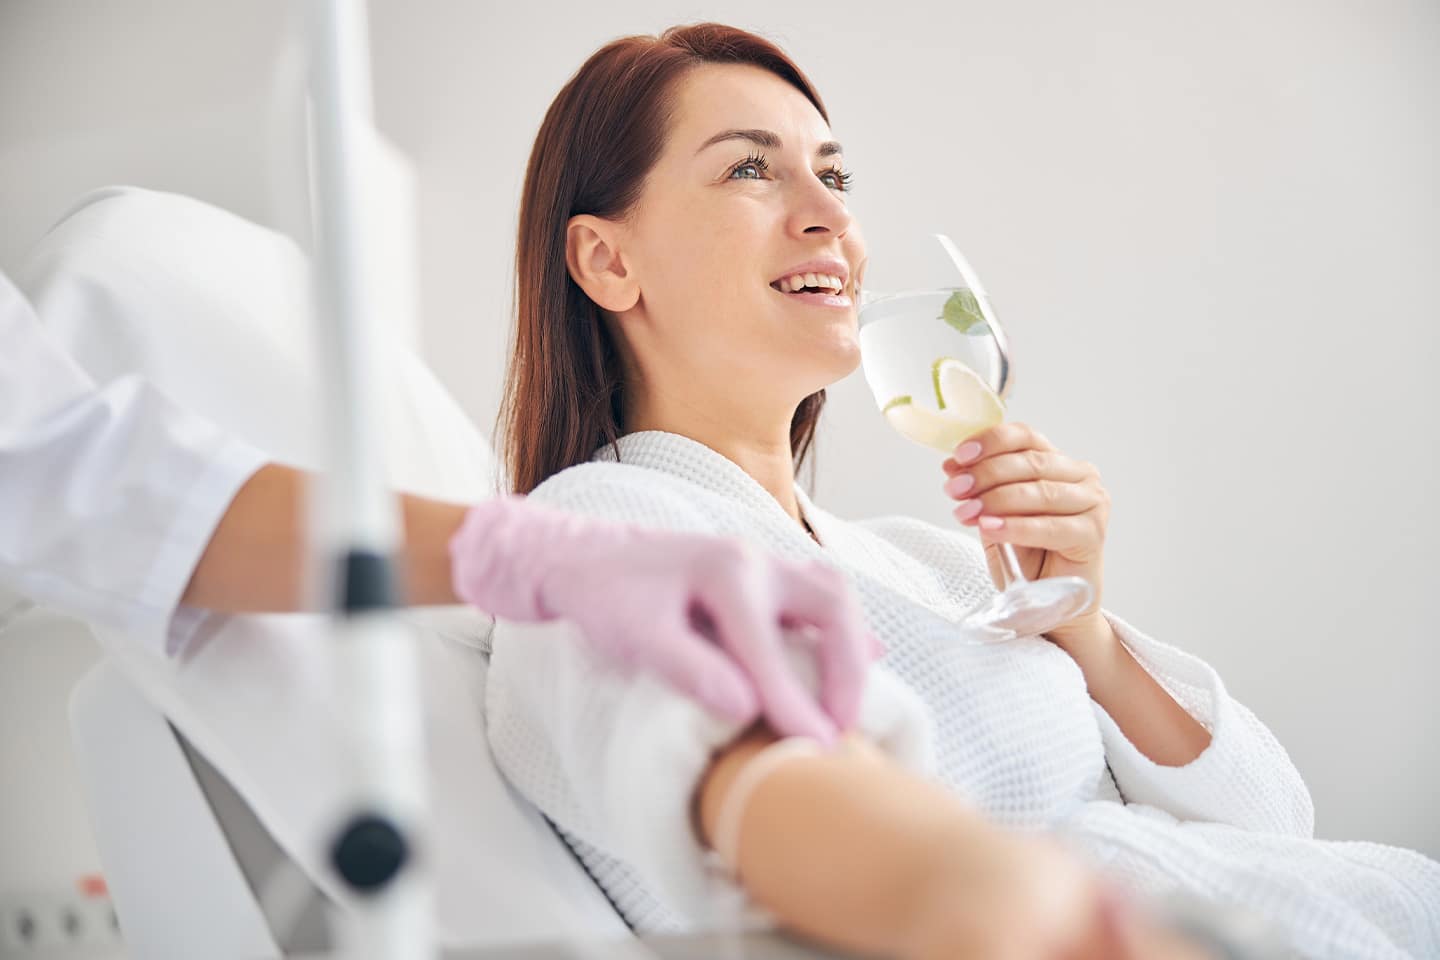 Woman enjoying a cucumber water while getting IV hydration therapy.